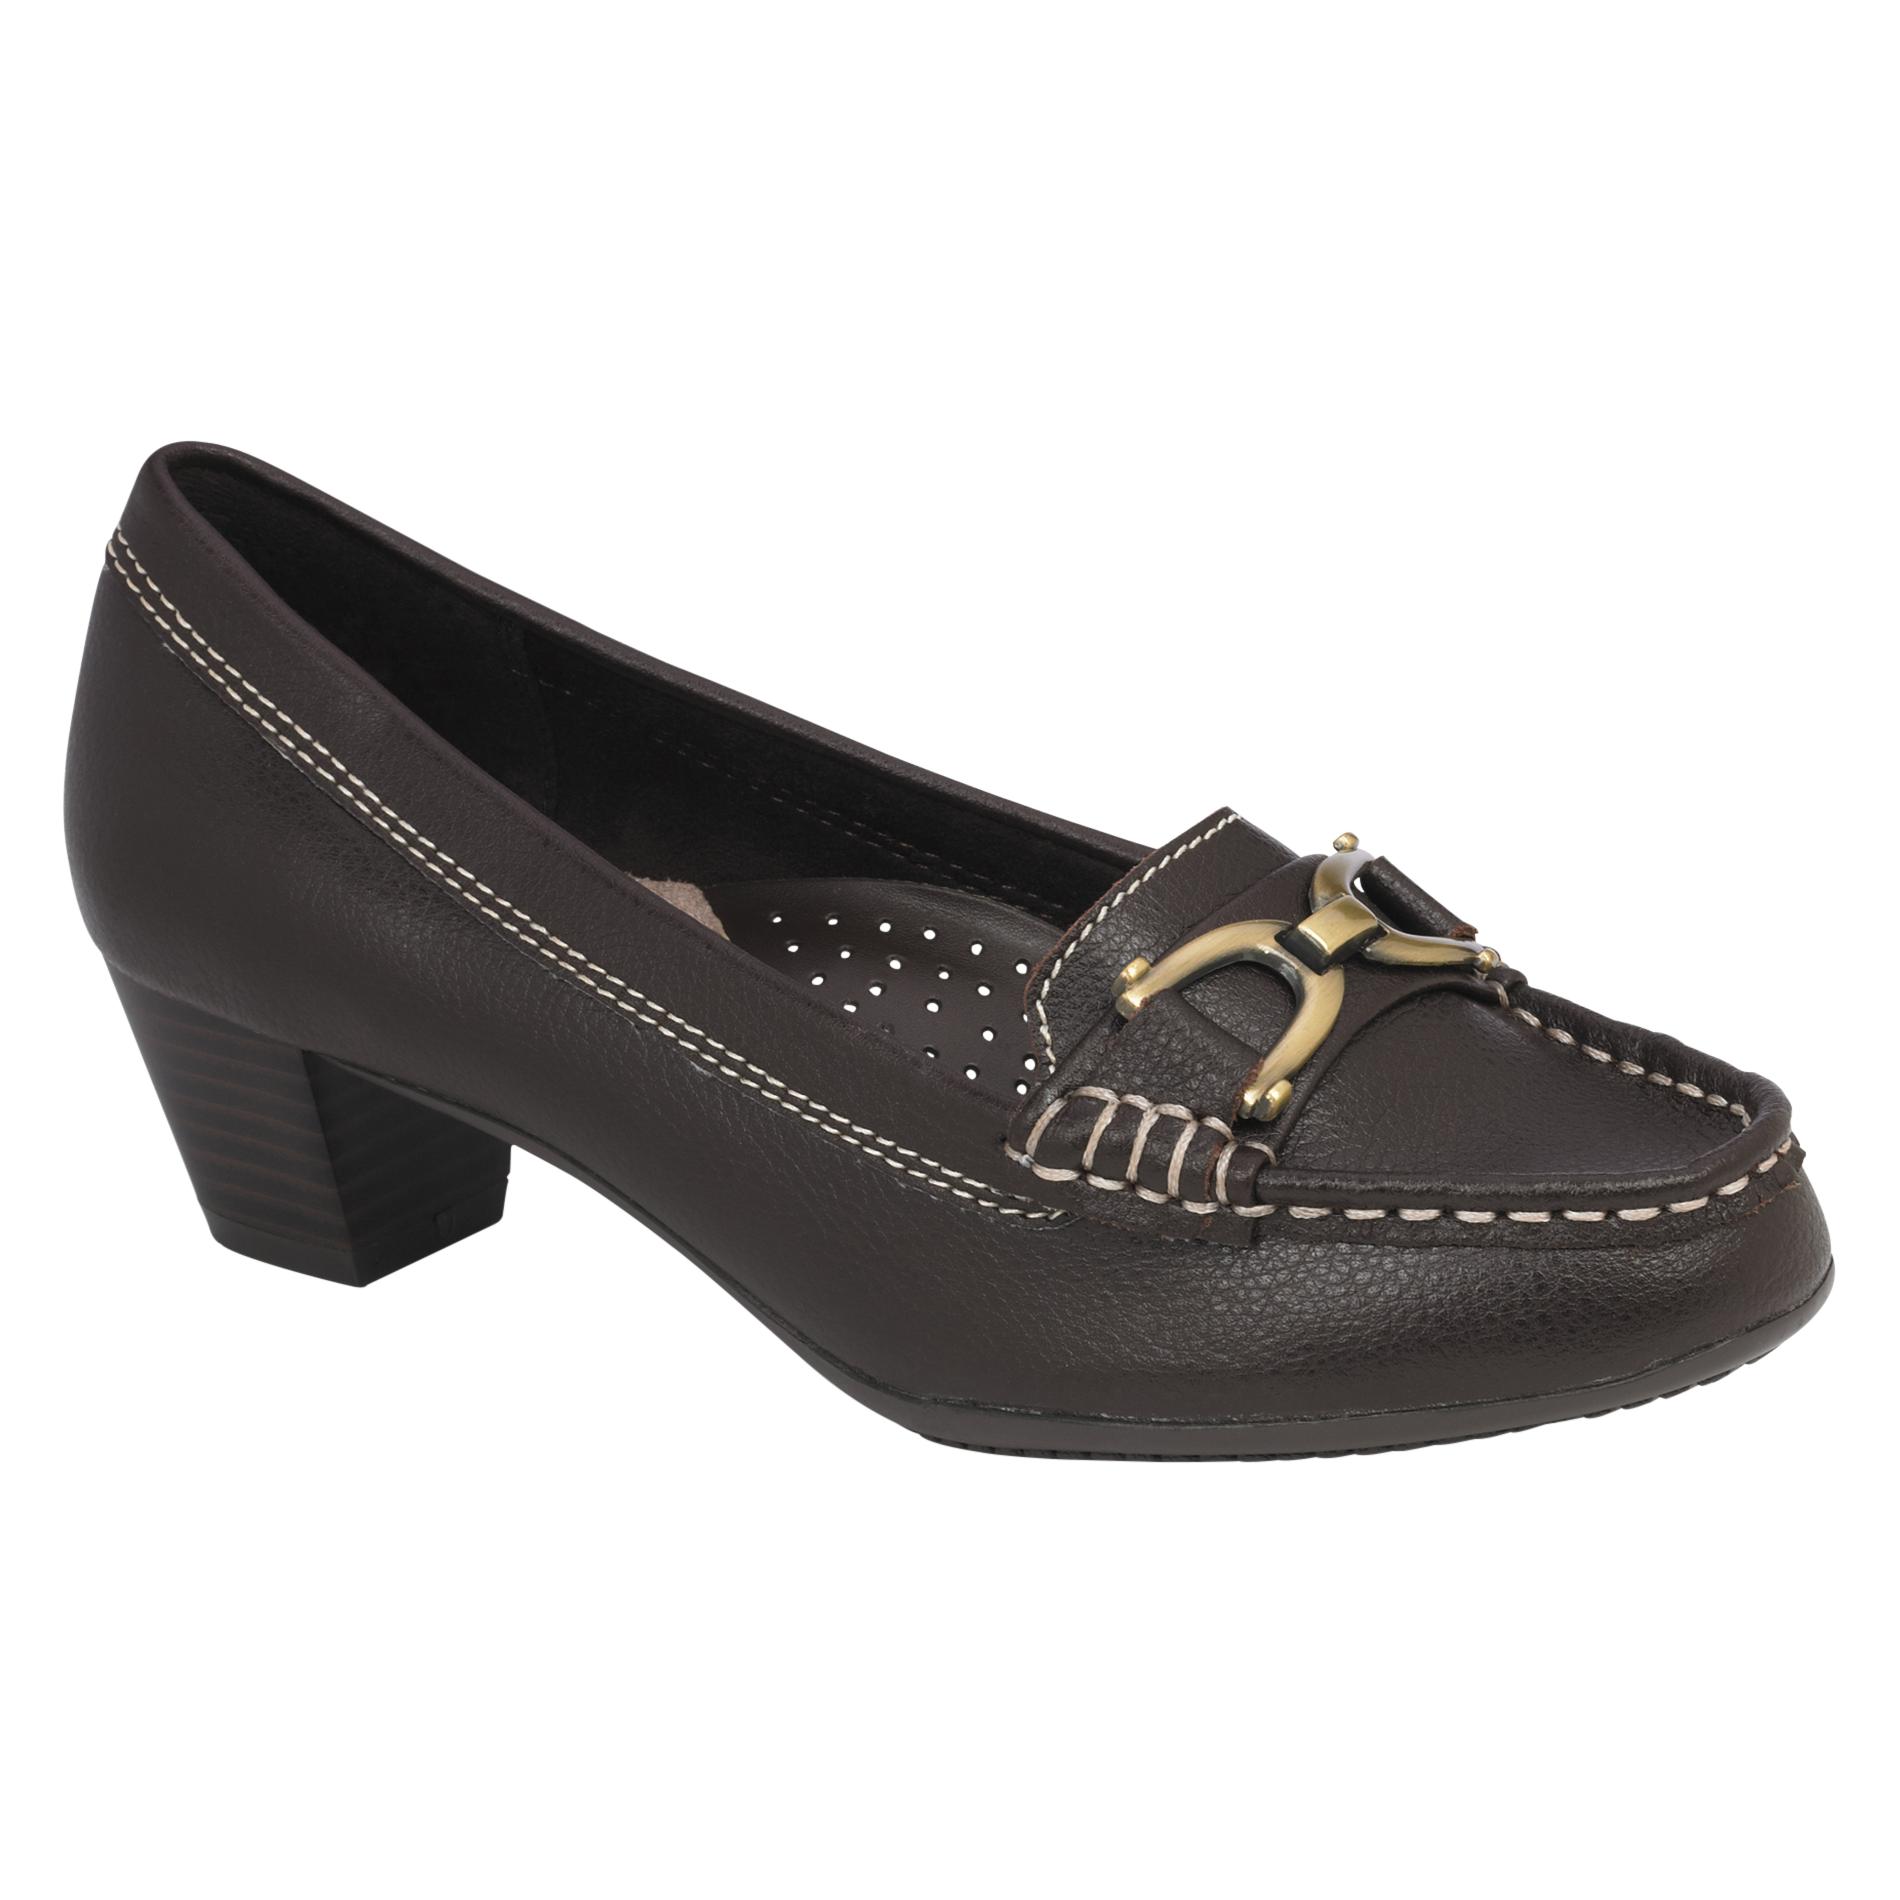 Thom McAn Women's Francis Leather Dress Loafer - Black Wide